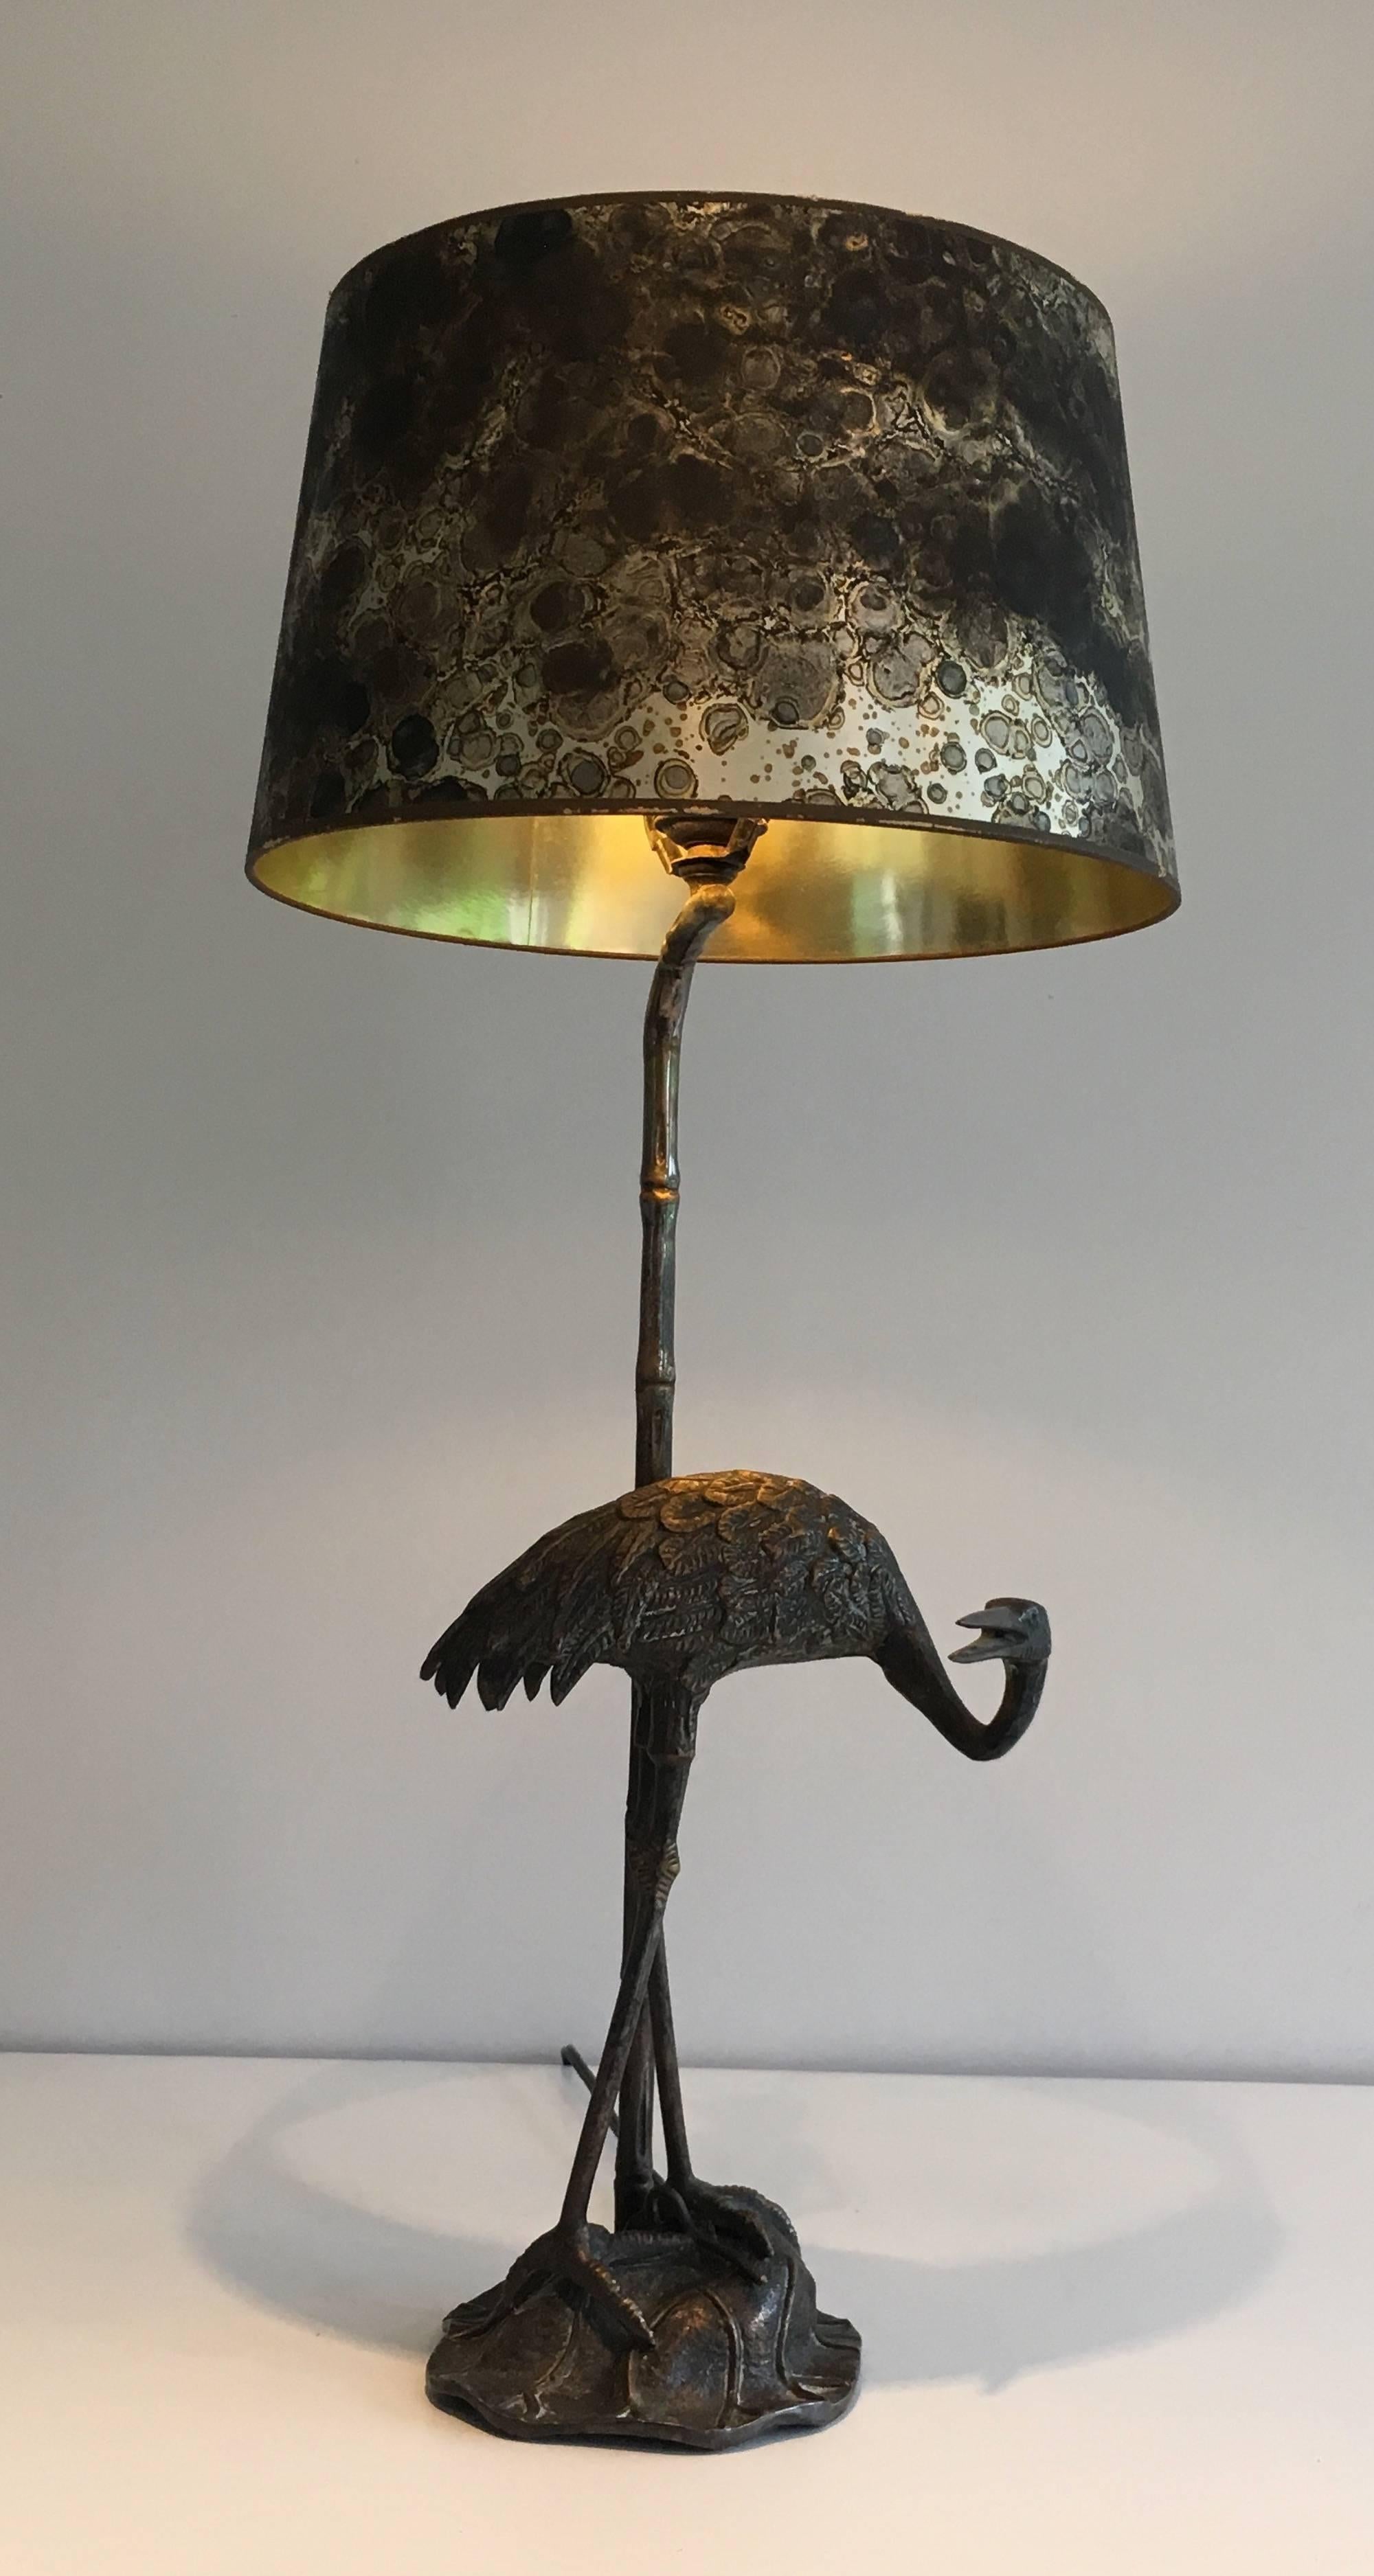 Silvered bronze Heron standing on faux-bamboo lamp by Maison Bagués, French, circa 1940s. This item is currently in France, please allow 2 to 4 weeks delivery to New York. Shipping costs from France to our warehouse in New York included in price.